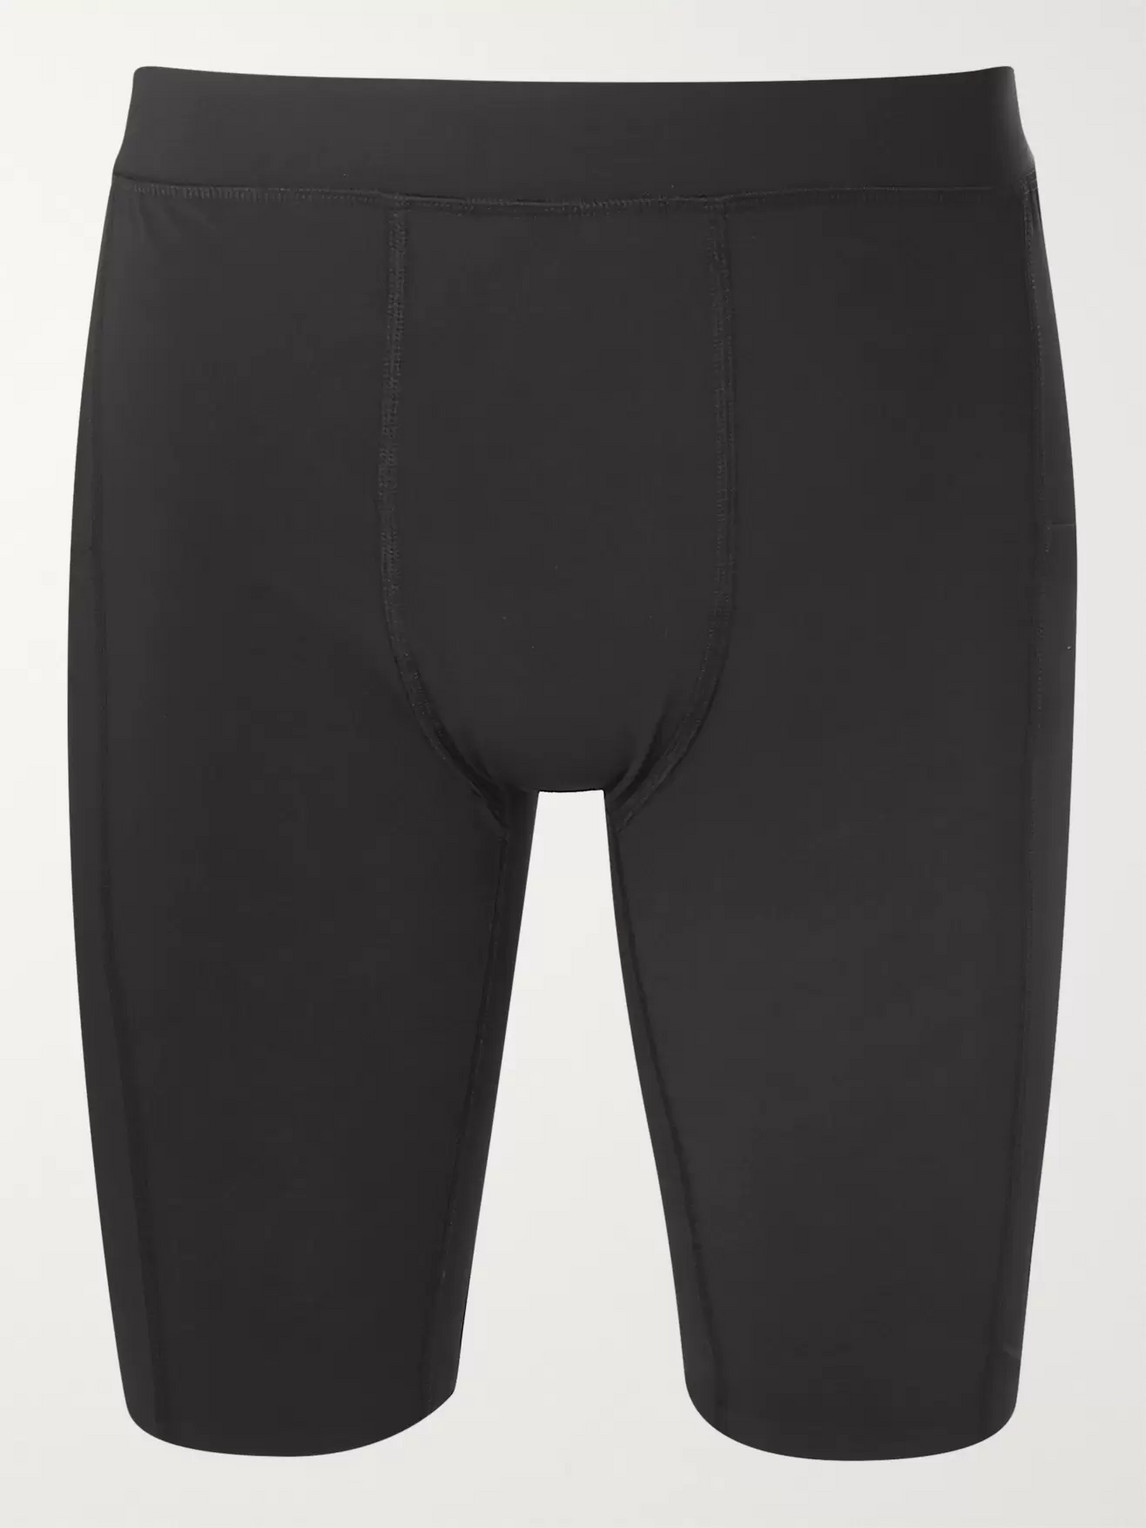 IFFLEY ROAD CHESTER COMPRESSION SHORTS